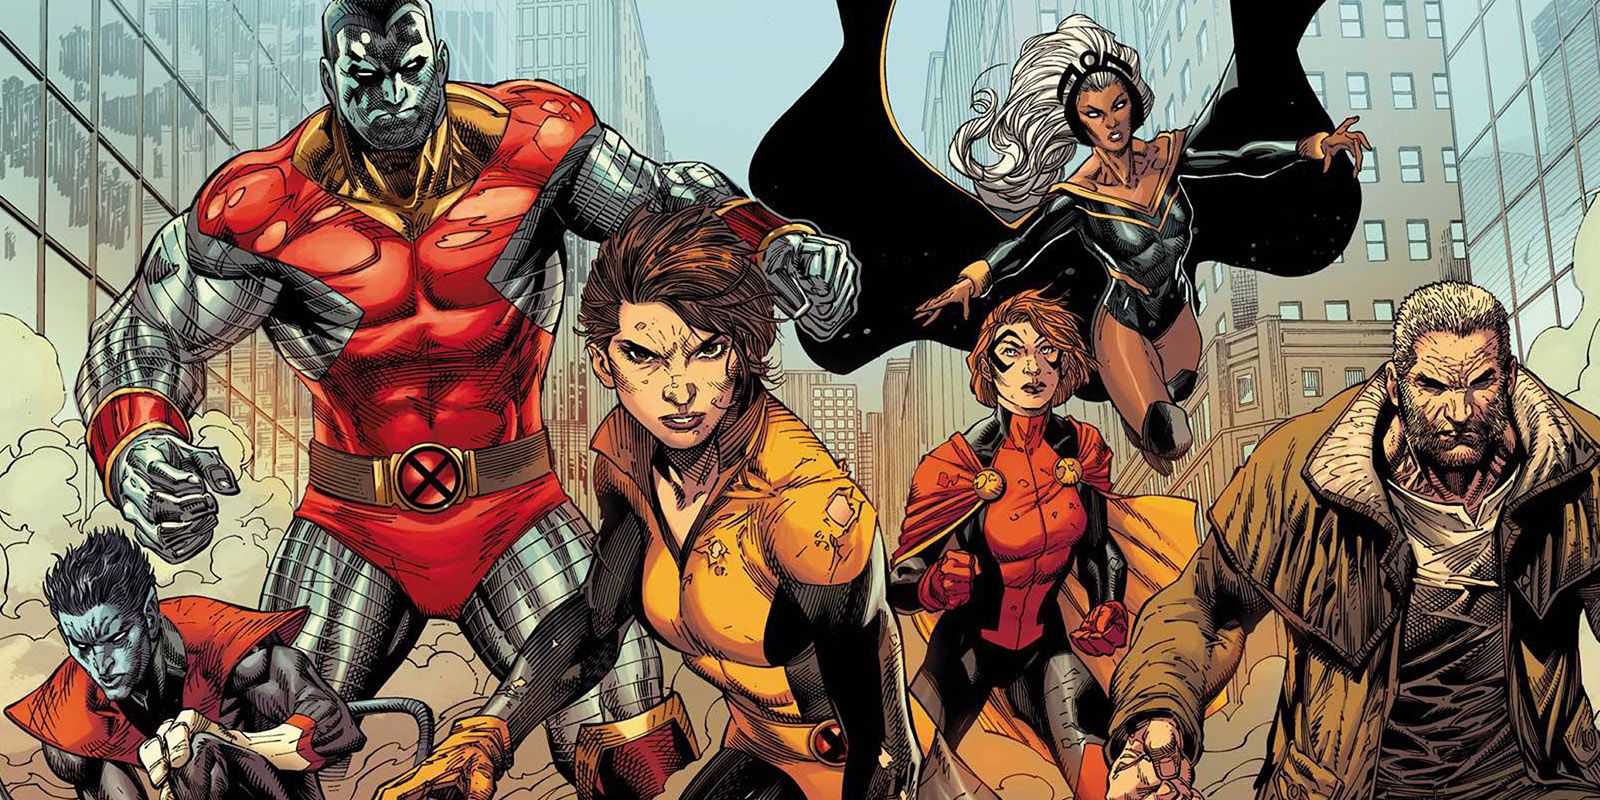 Kitty Pryde leads a team of X-Men into battle in X-Men: Gold.